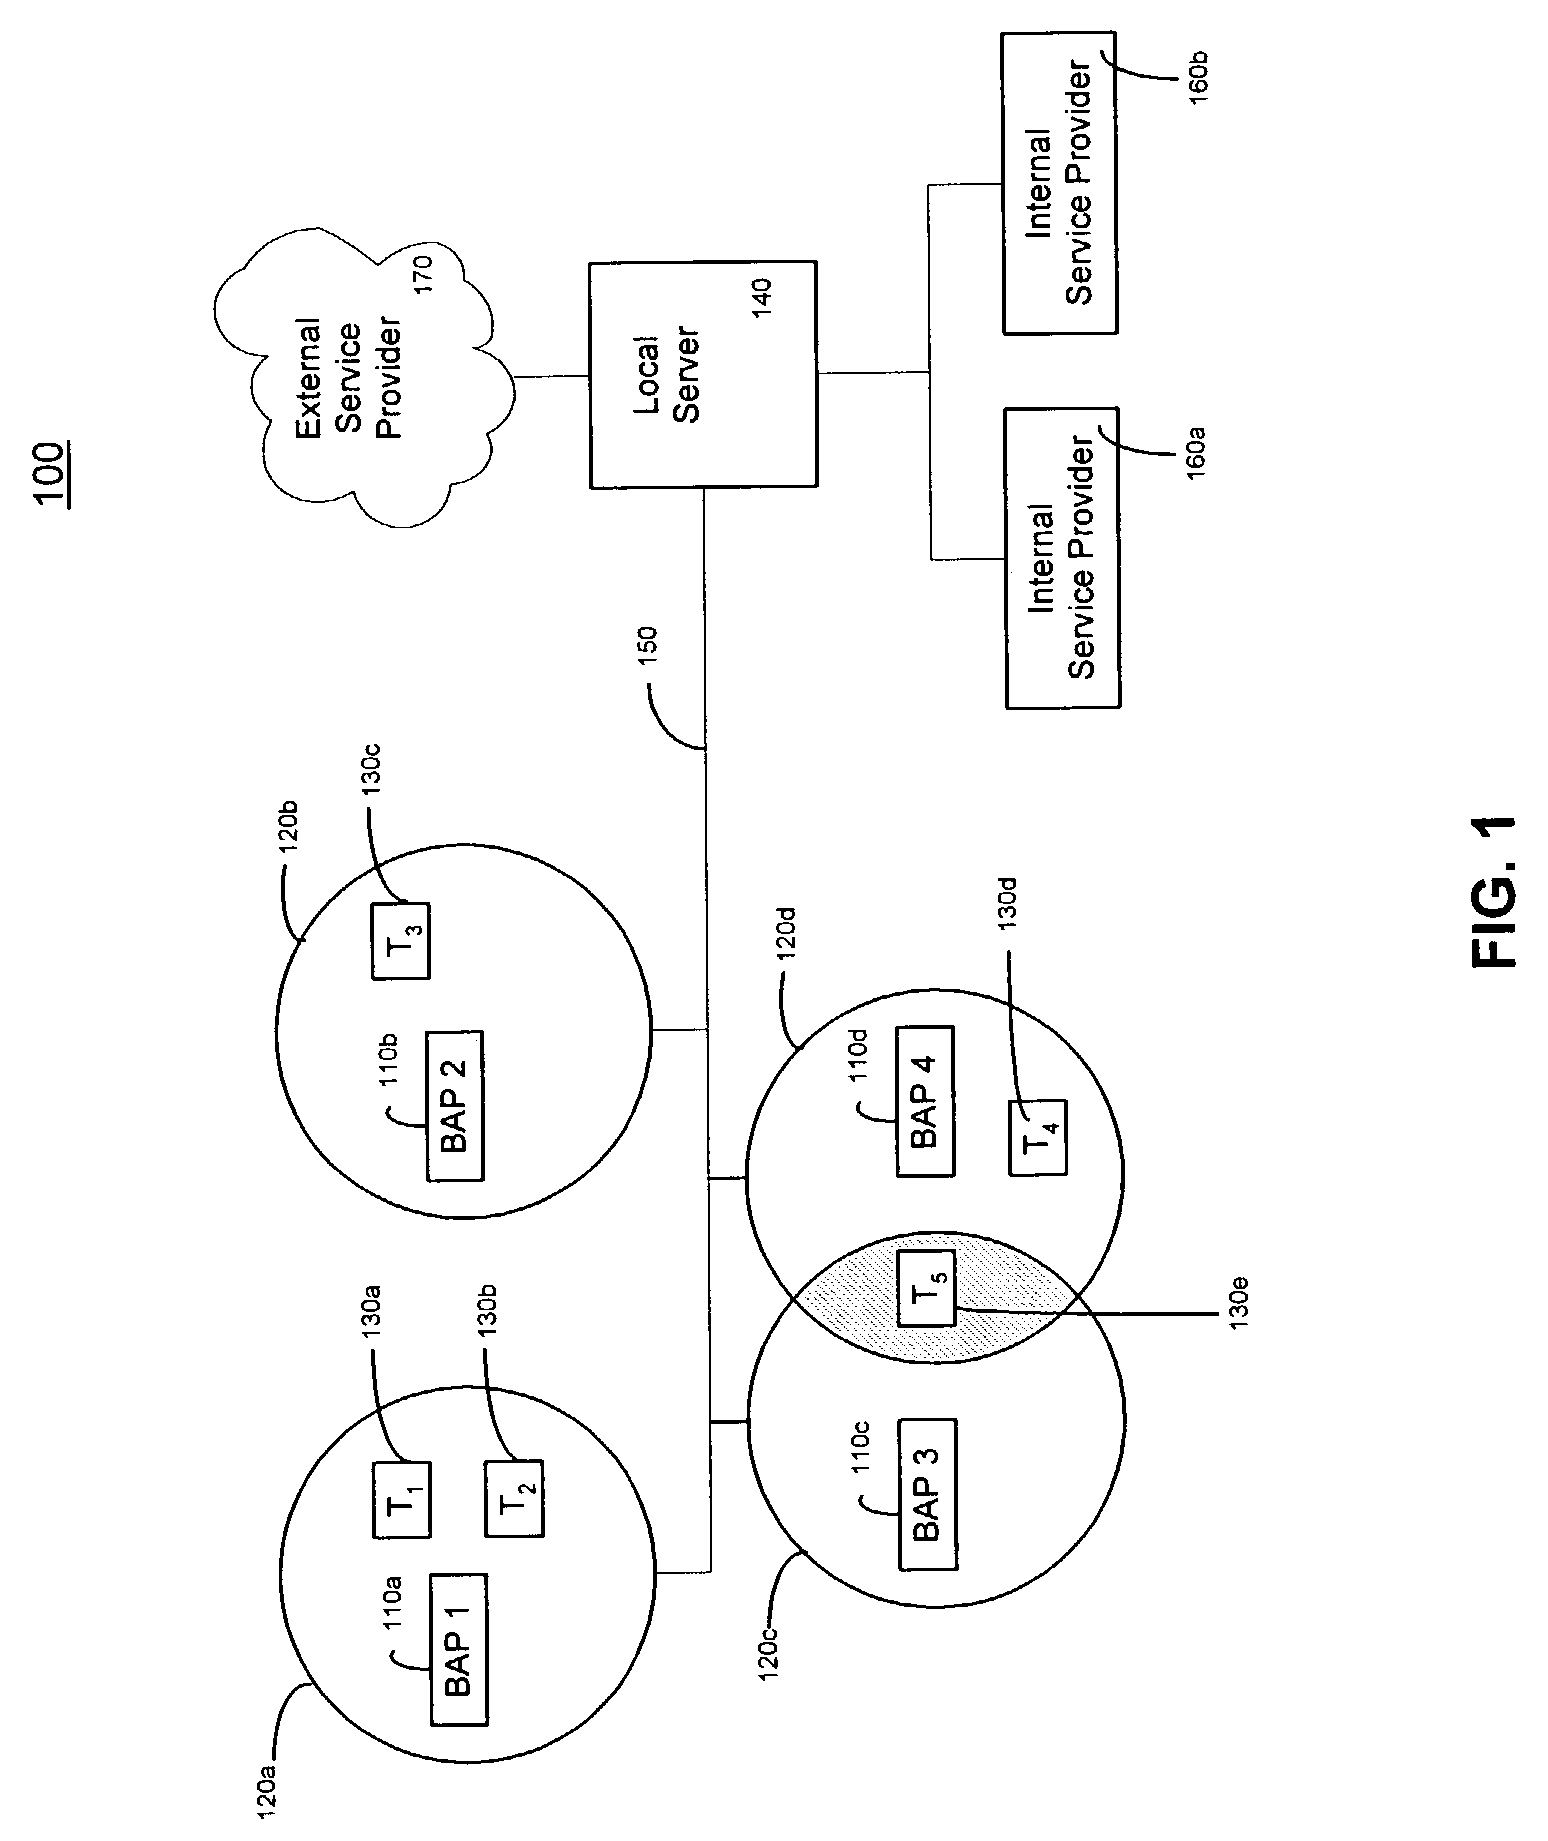 Automatic and dynamic service information delivery from service providers to data terminals in an access point network